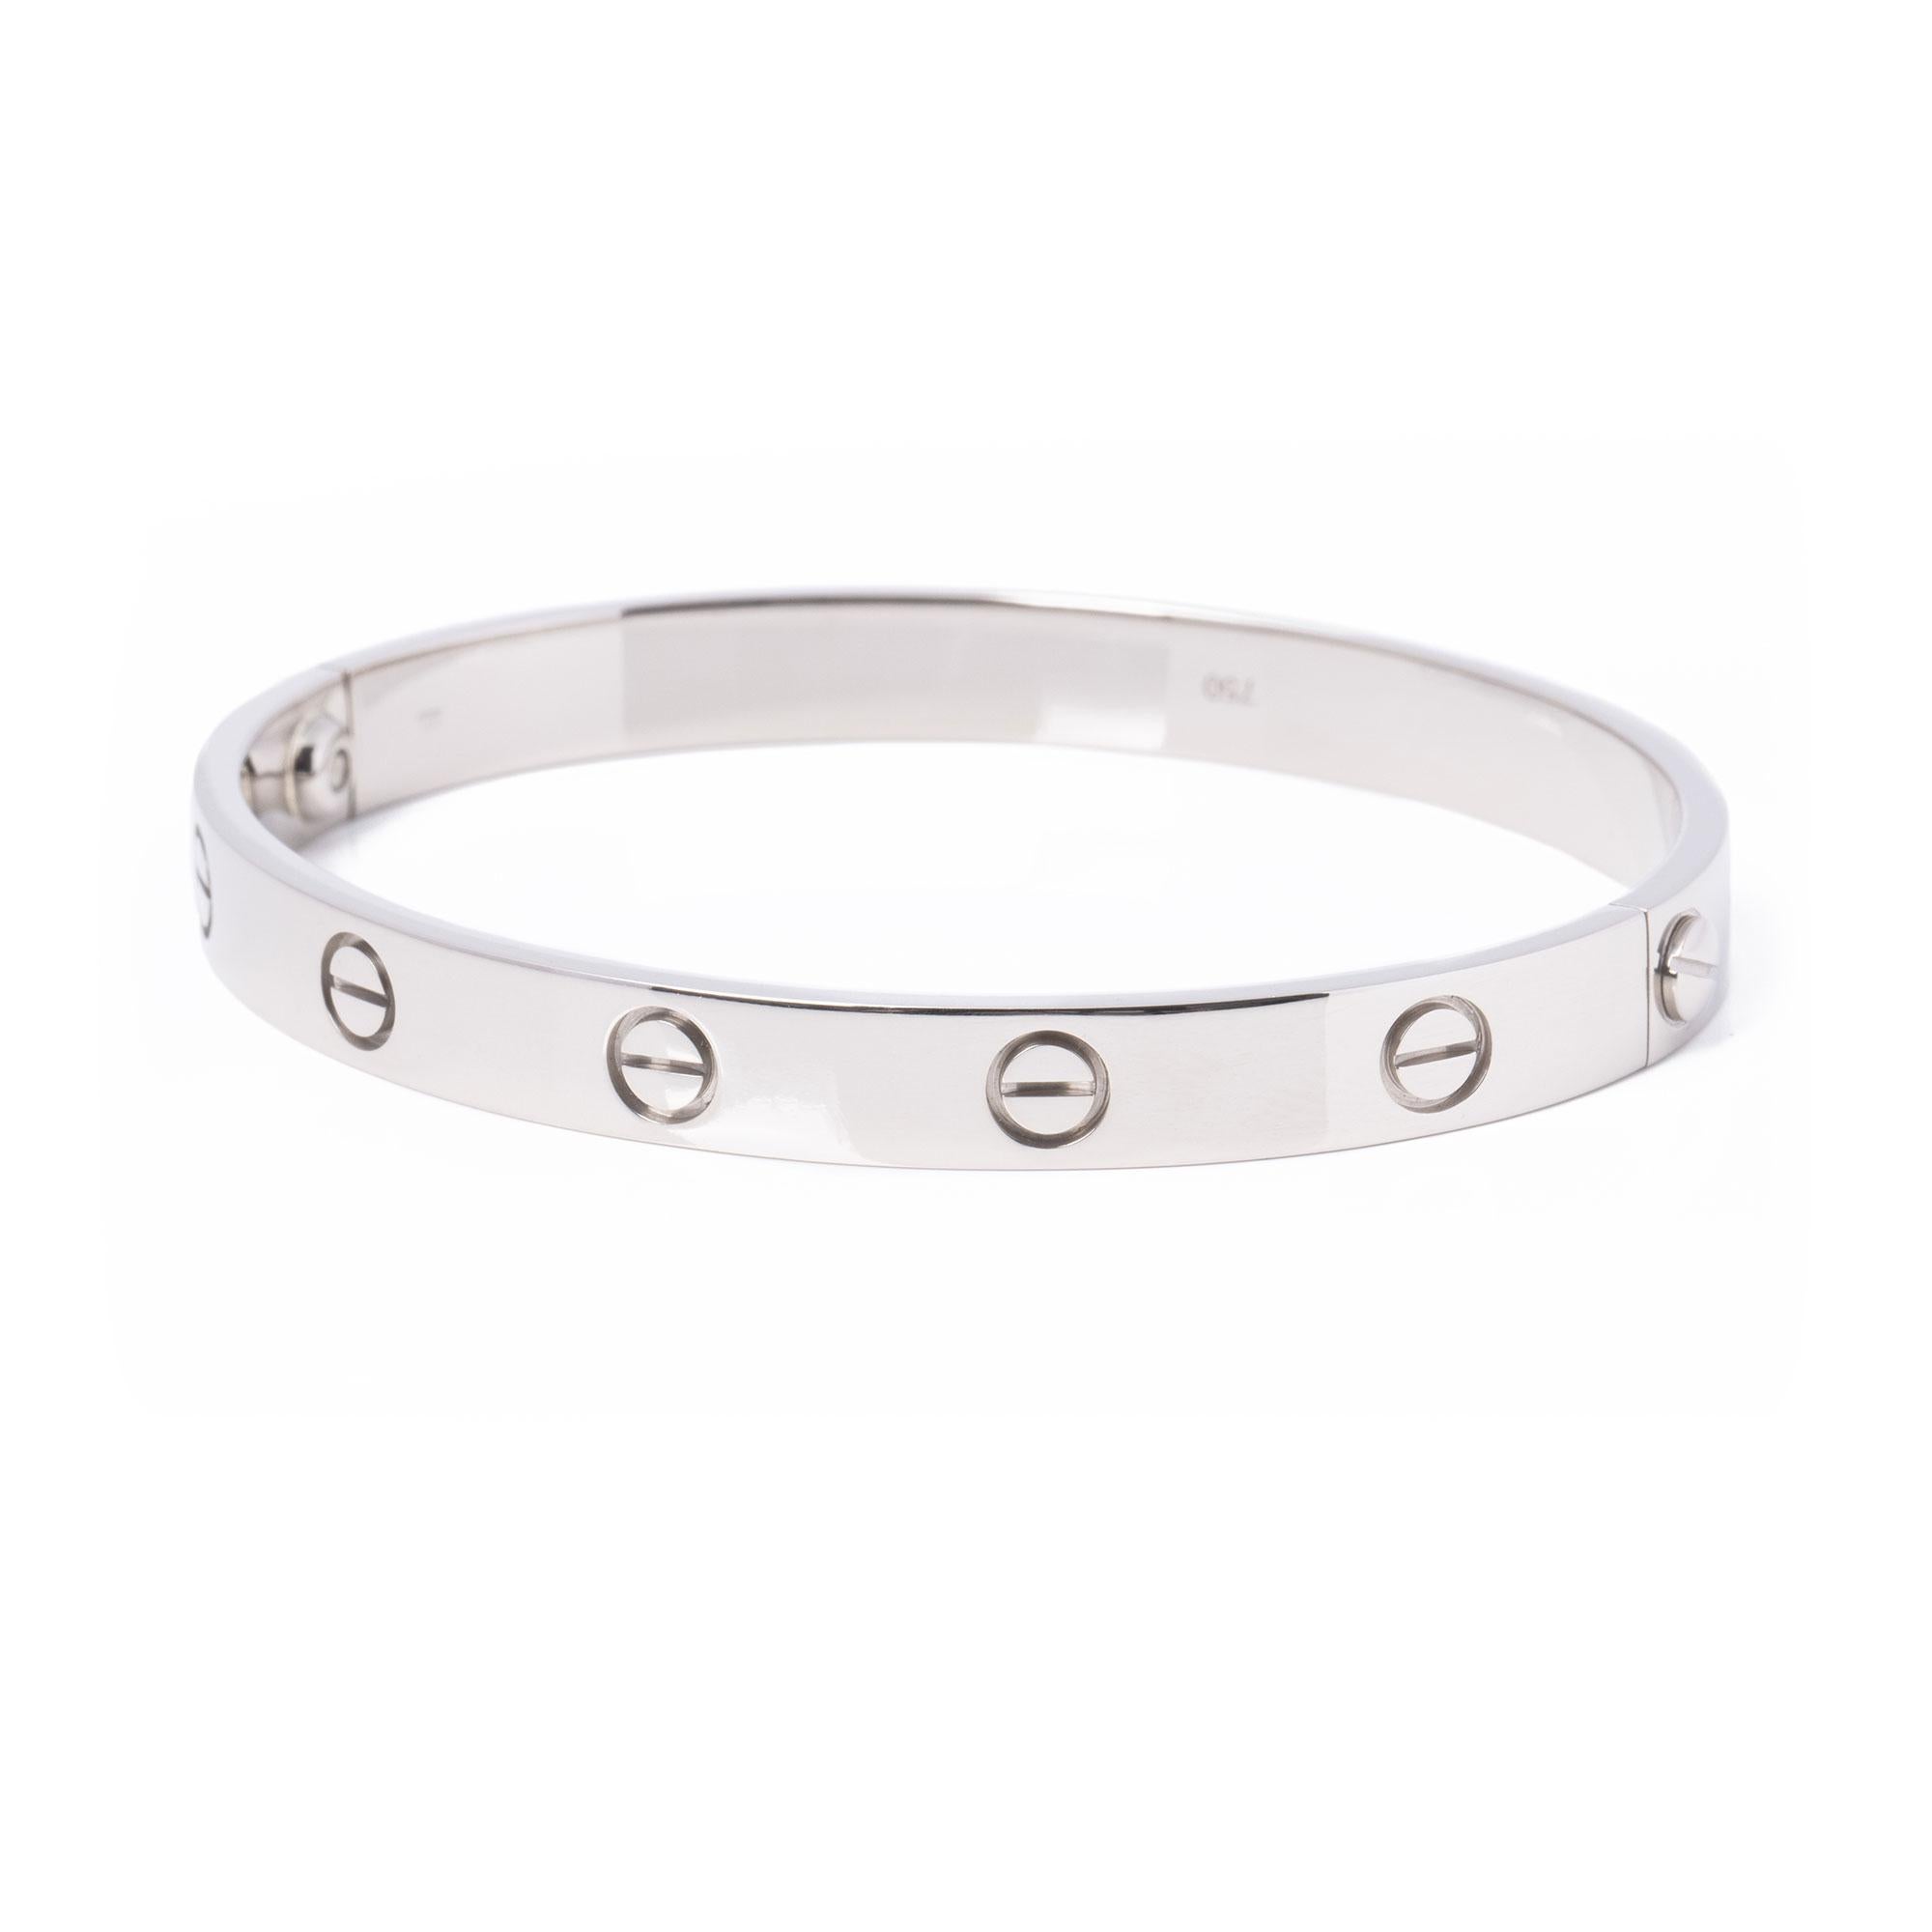 This bangle from Cartier is from their Love collection and features their iconic screw detailing set in 18ct white gold. Complete with a Cartier pouch and service papers. Our Xupes reference is COMJ594 should you need to quote this. 